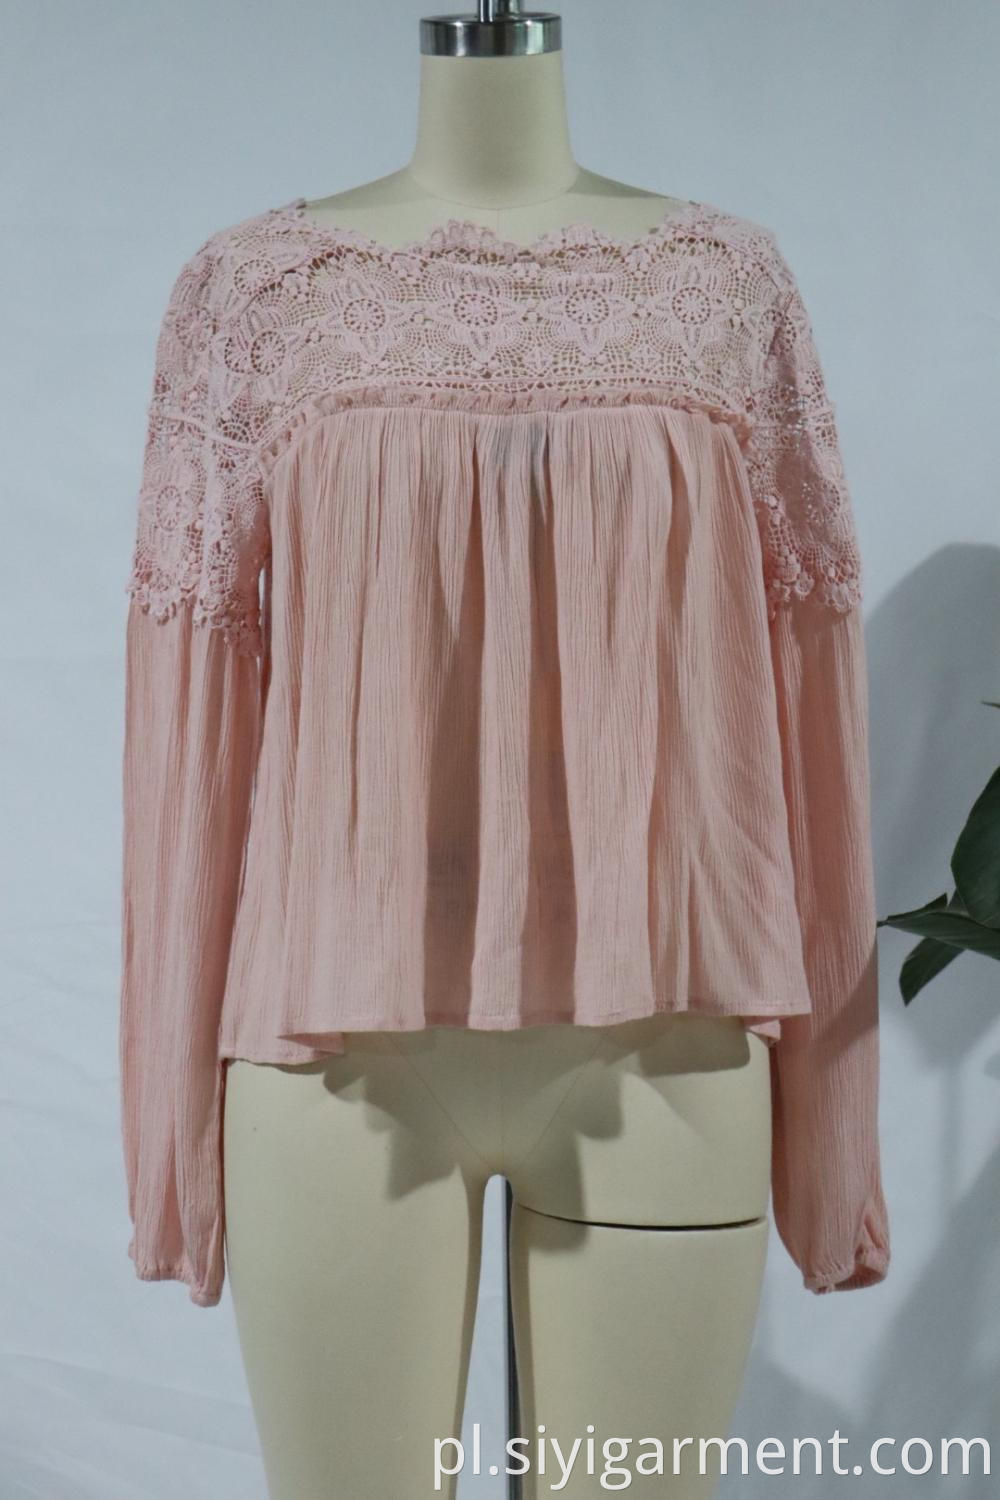 Ladies' Long-Sleeved Blouse With Lace Collar